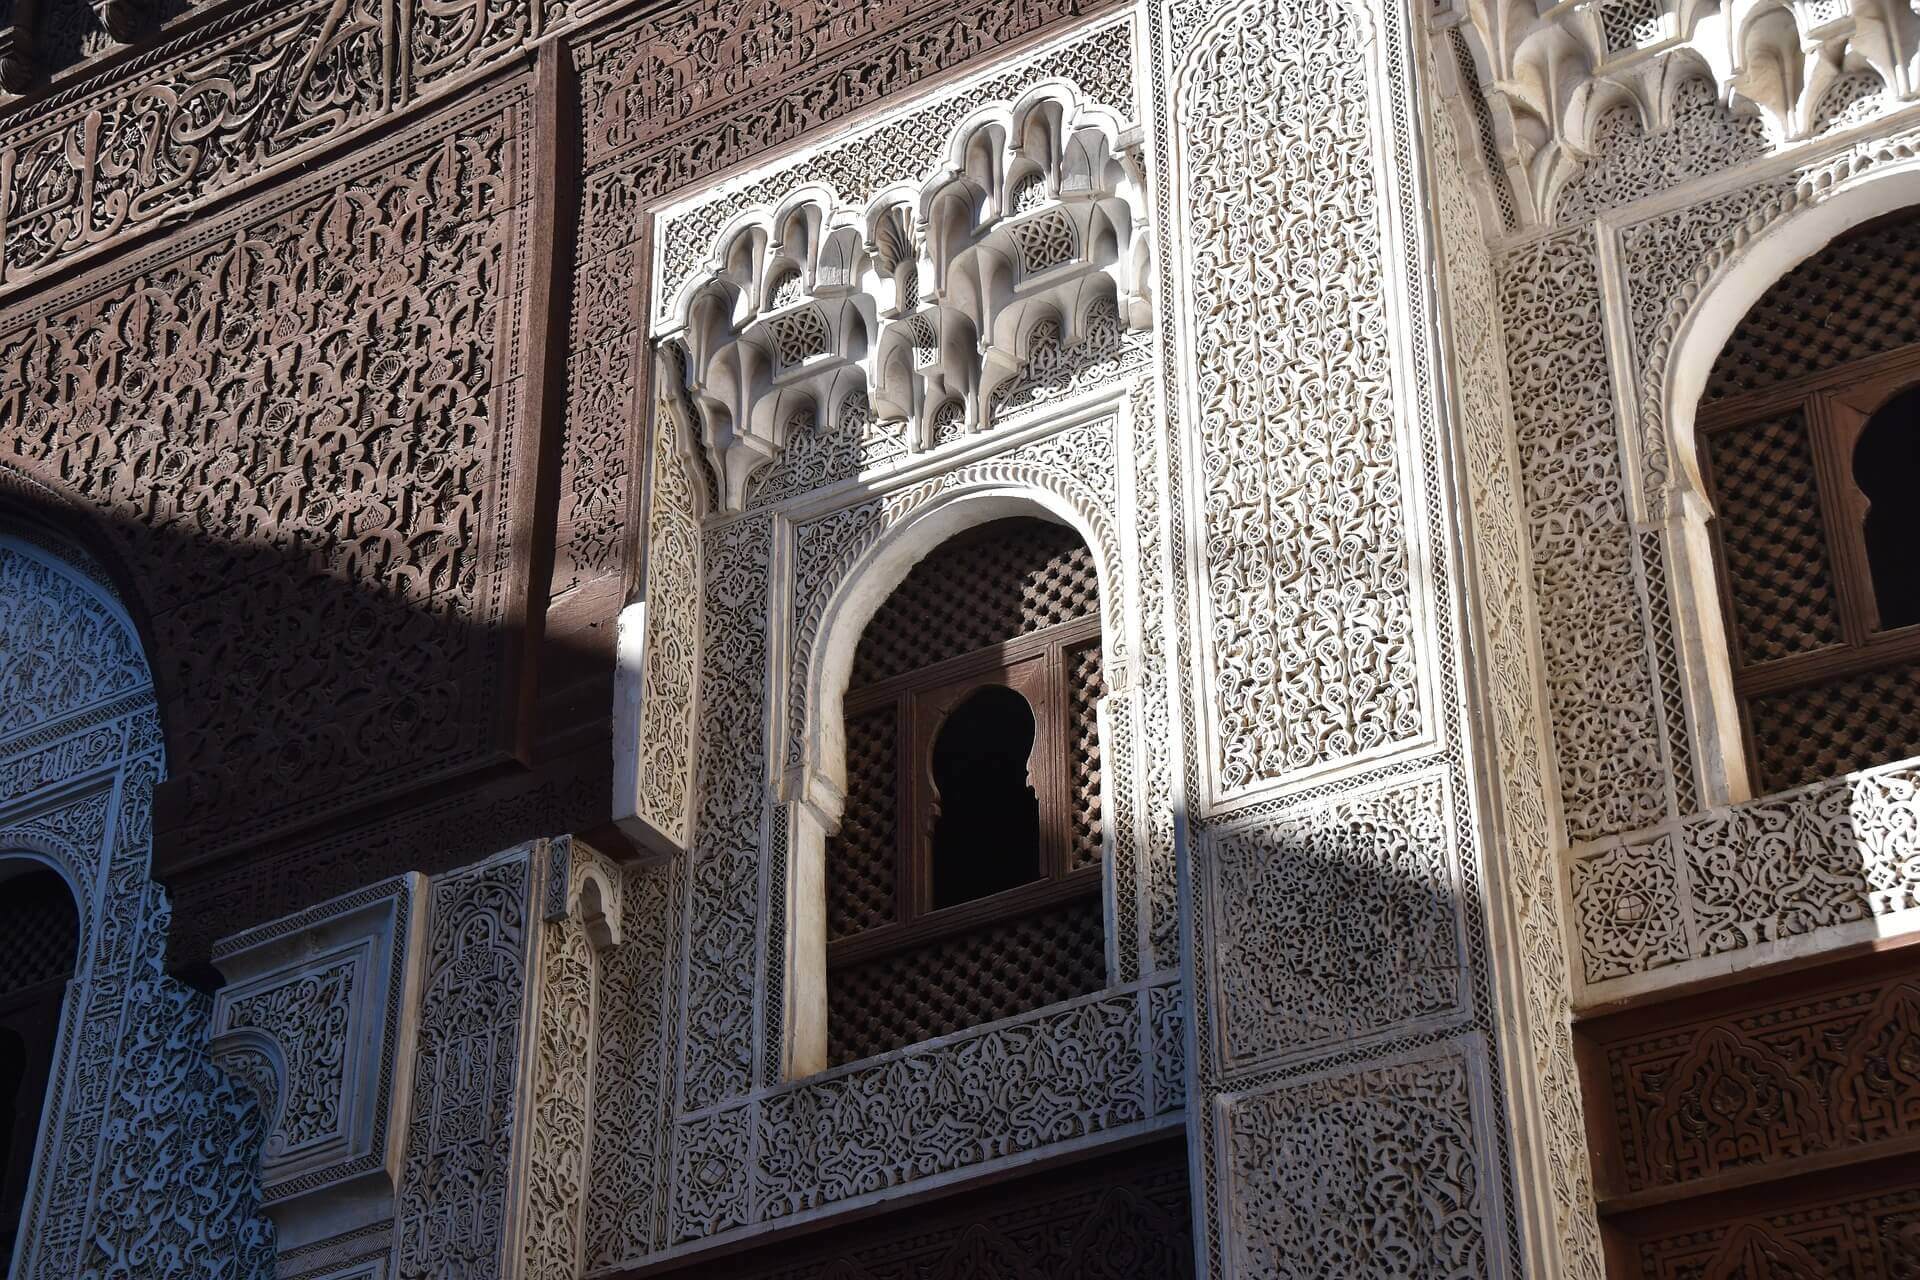 5 days tour from Fes to Marrakech